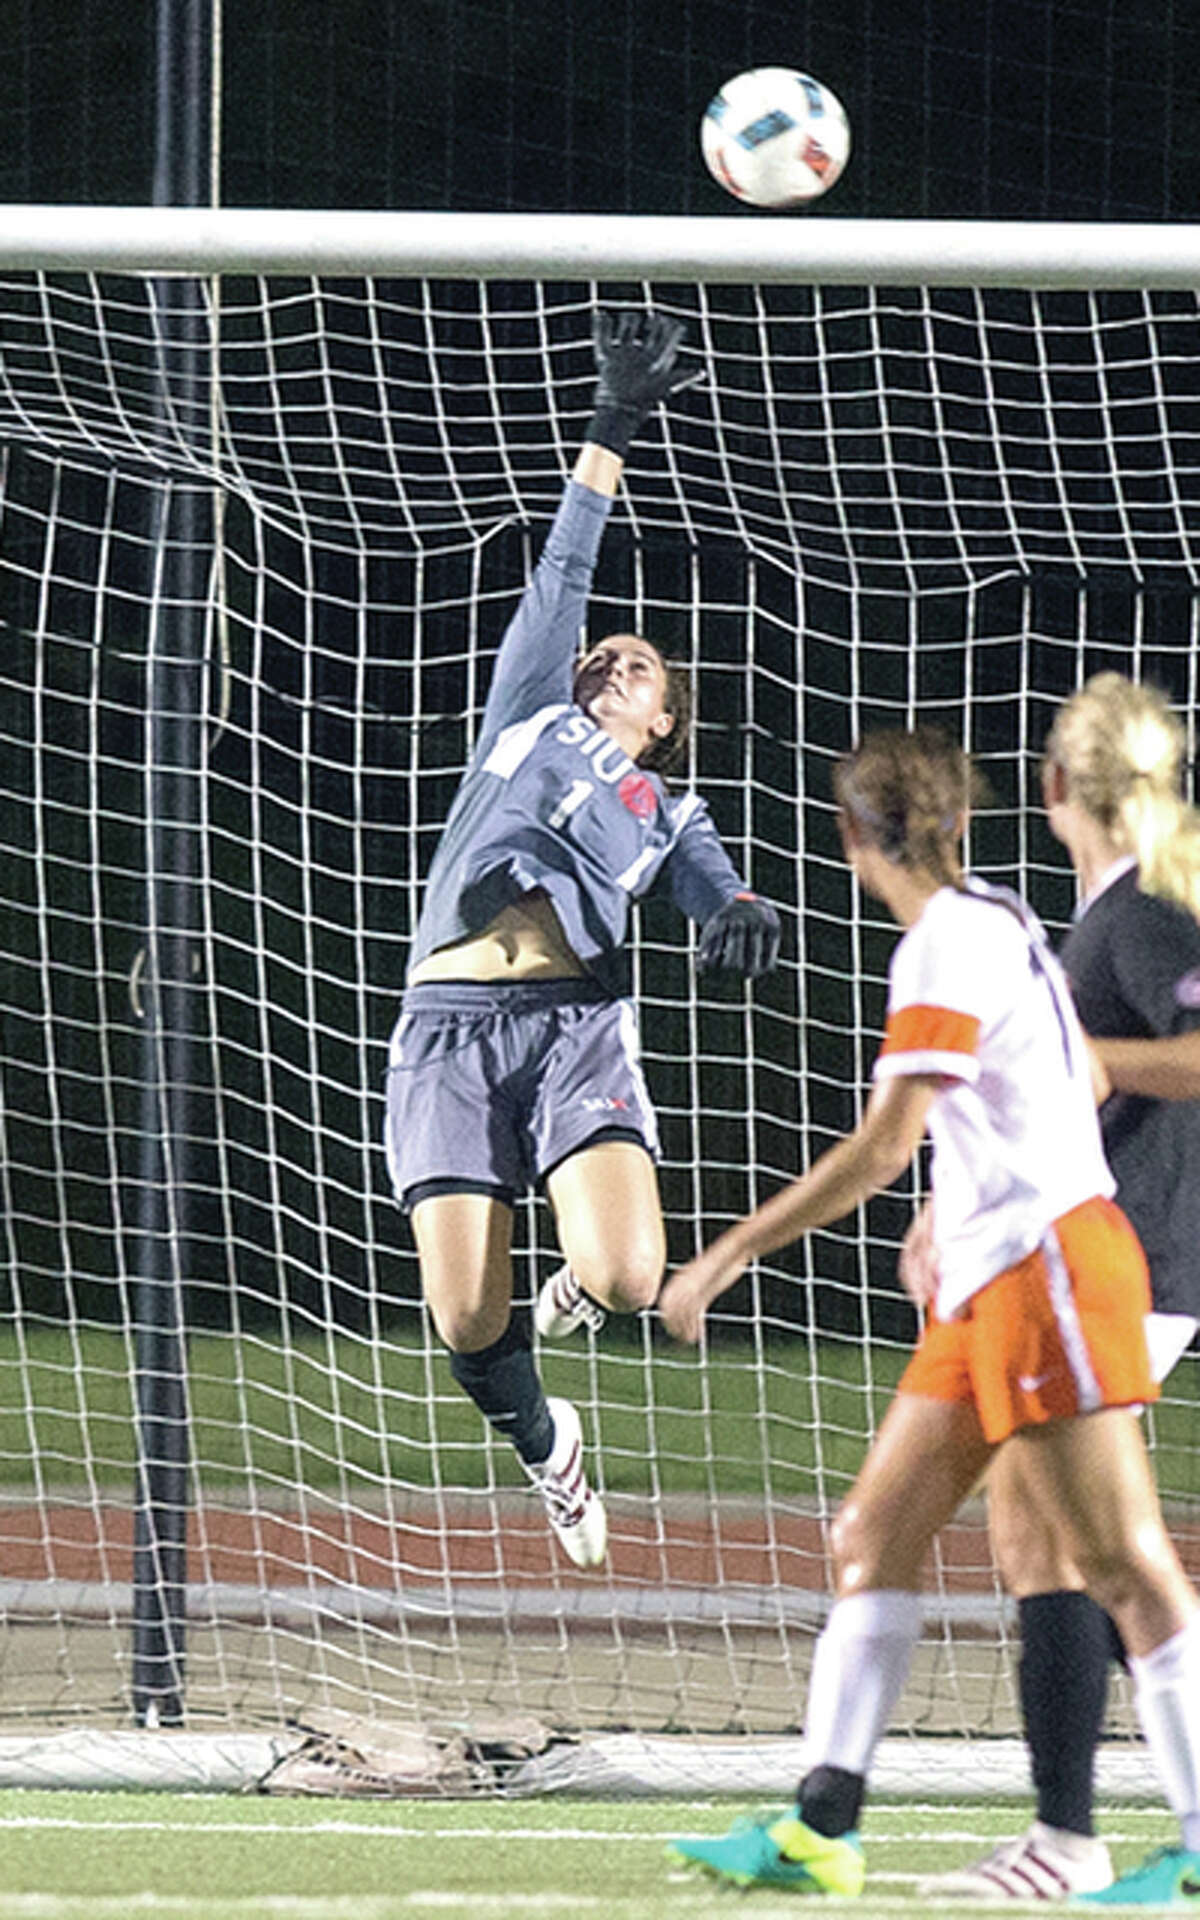 SIUE goalie Juli Rossi made nine saves, including one in sudden-death penalties, helping the Cougars oust No. 11-ranked Notre Dame in the first round of the NCAA Division I Women’s Soccer Tournament Friday night at Notre Dame. She is shown making a save in action earlier this season.